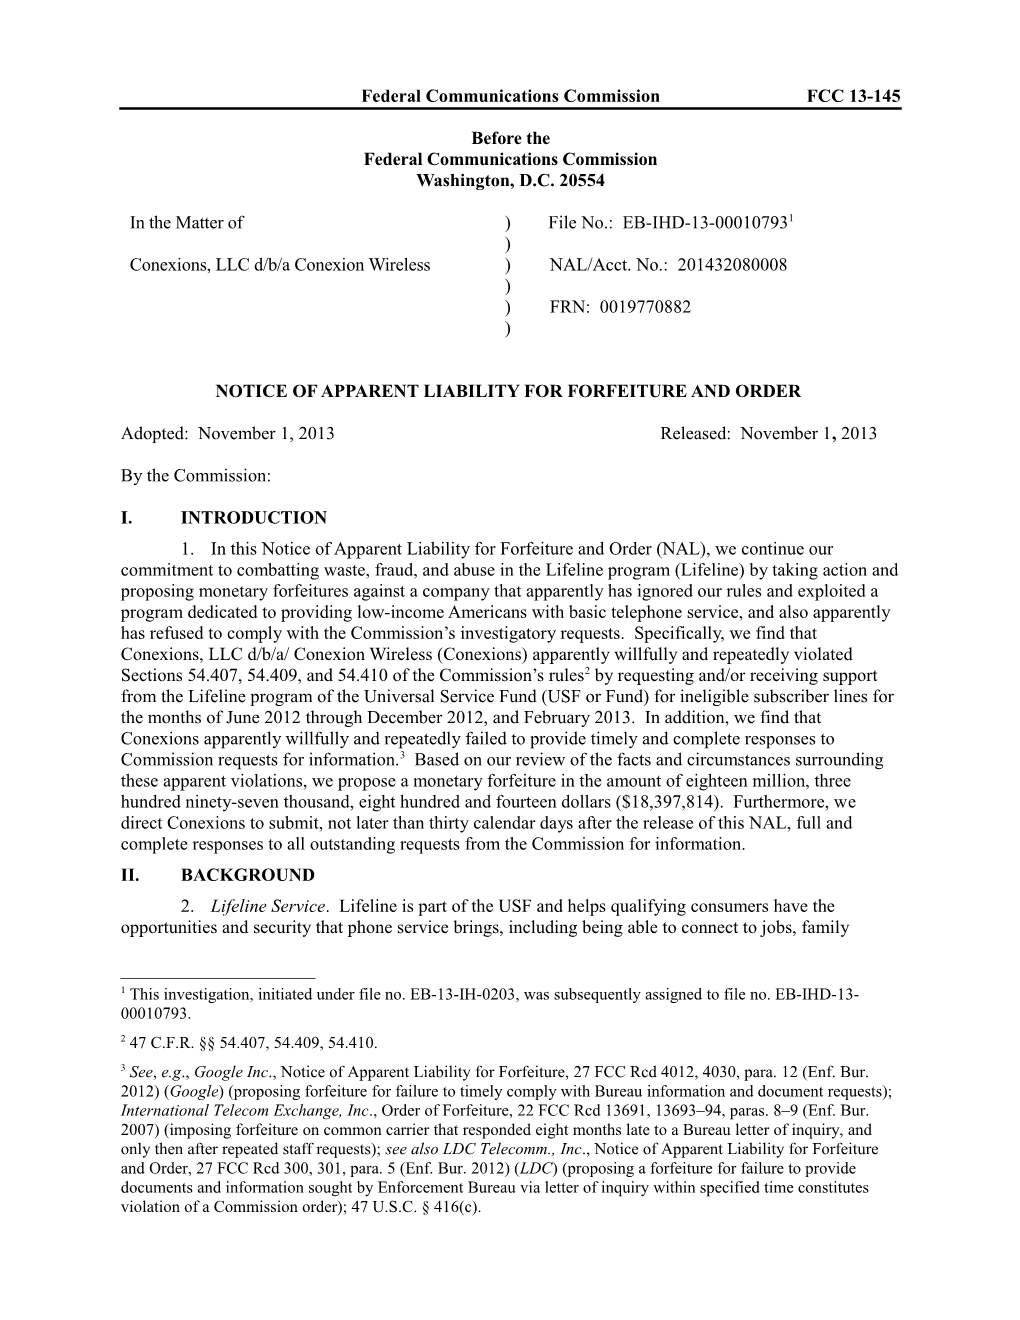 Notice of Apparent Liability for Forfeiture and Order s1